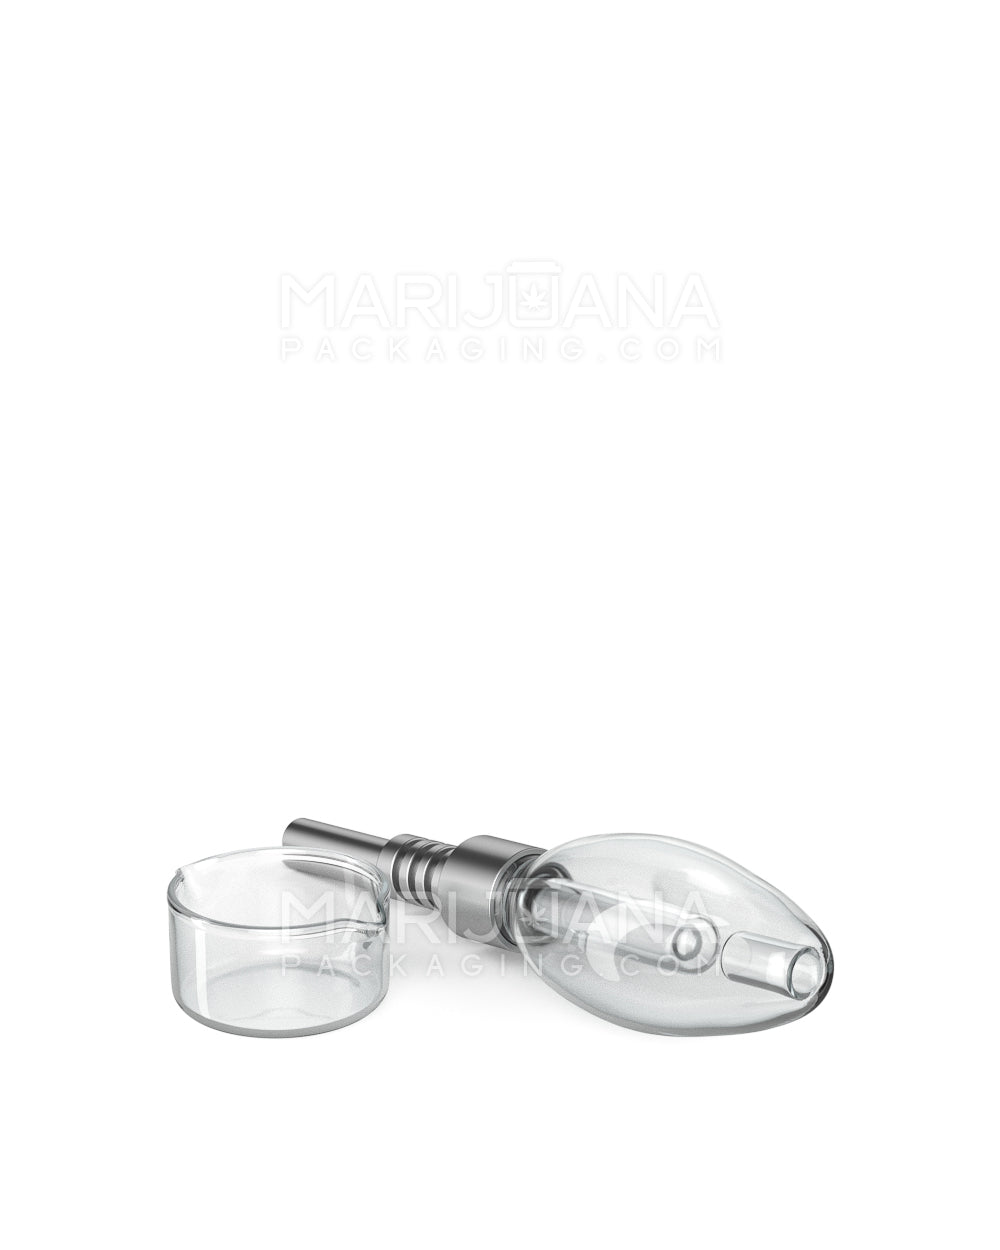 Nectar Collector Dab Pipe w/ Titanium Tip | 5.5in Long - 14mm Attachment - Clear - 5